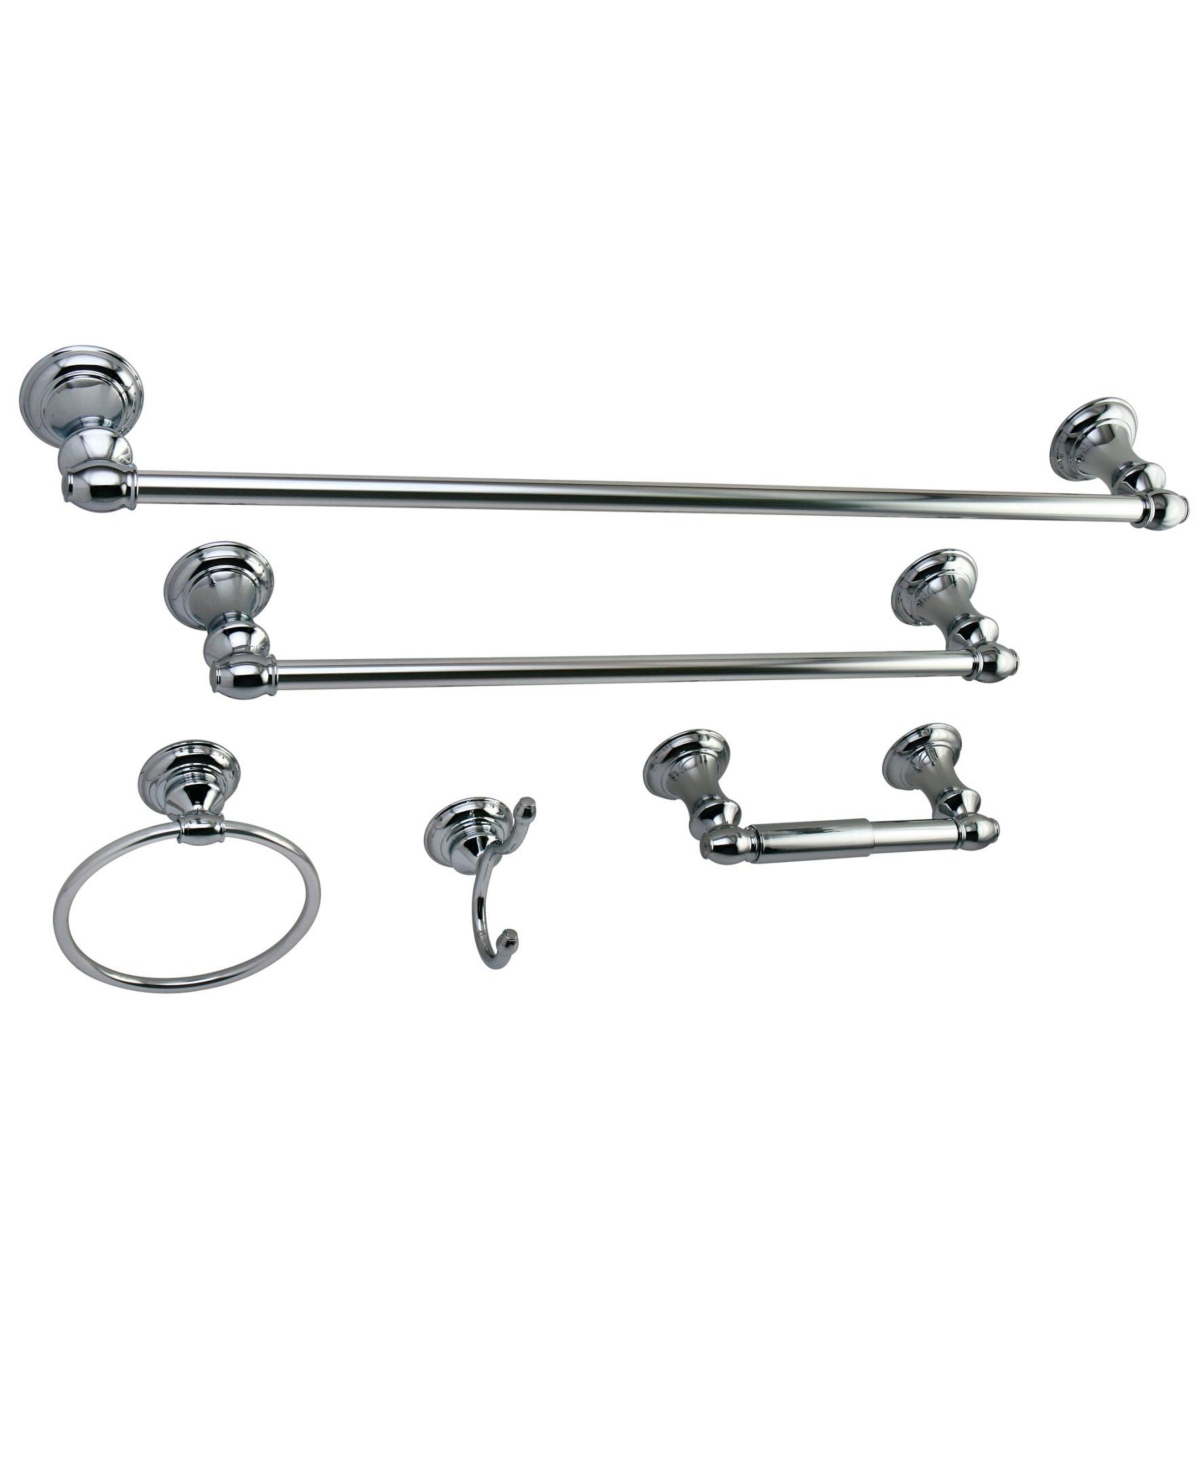 Kingston Brass Provence 5-Pc. Bathroom Accessory Set in Polished Chrome Bedding